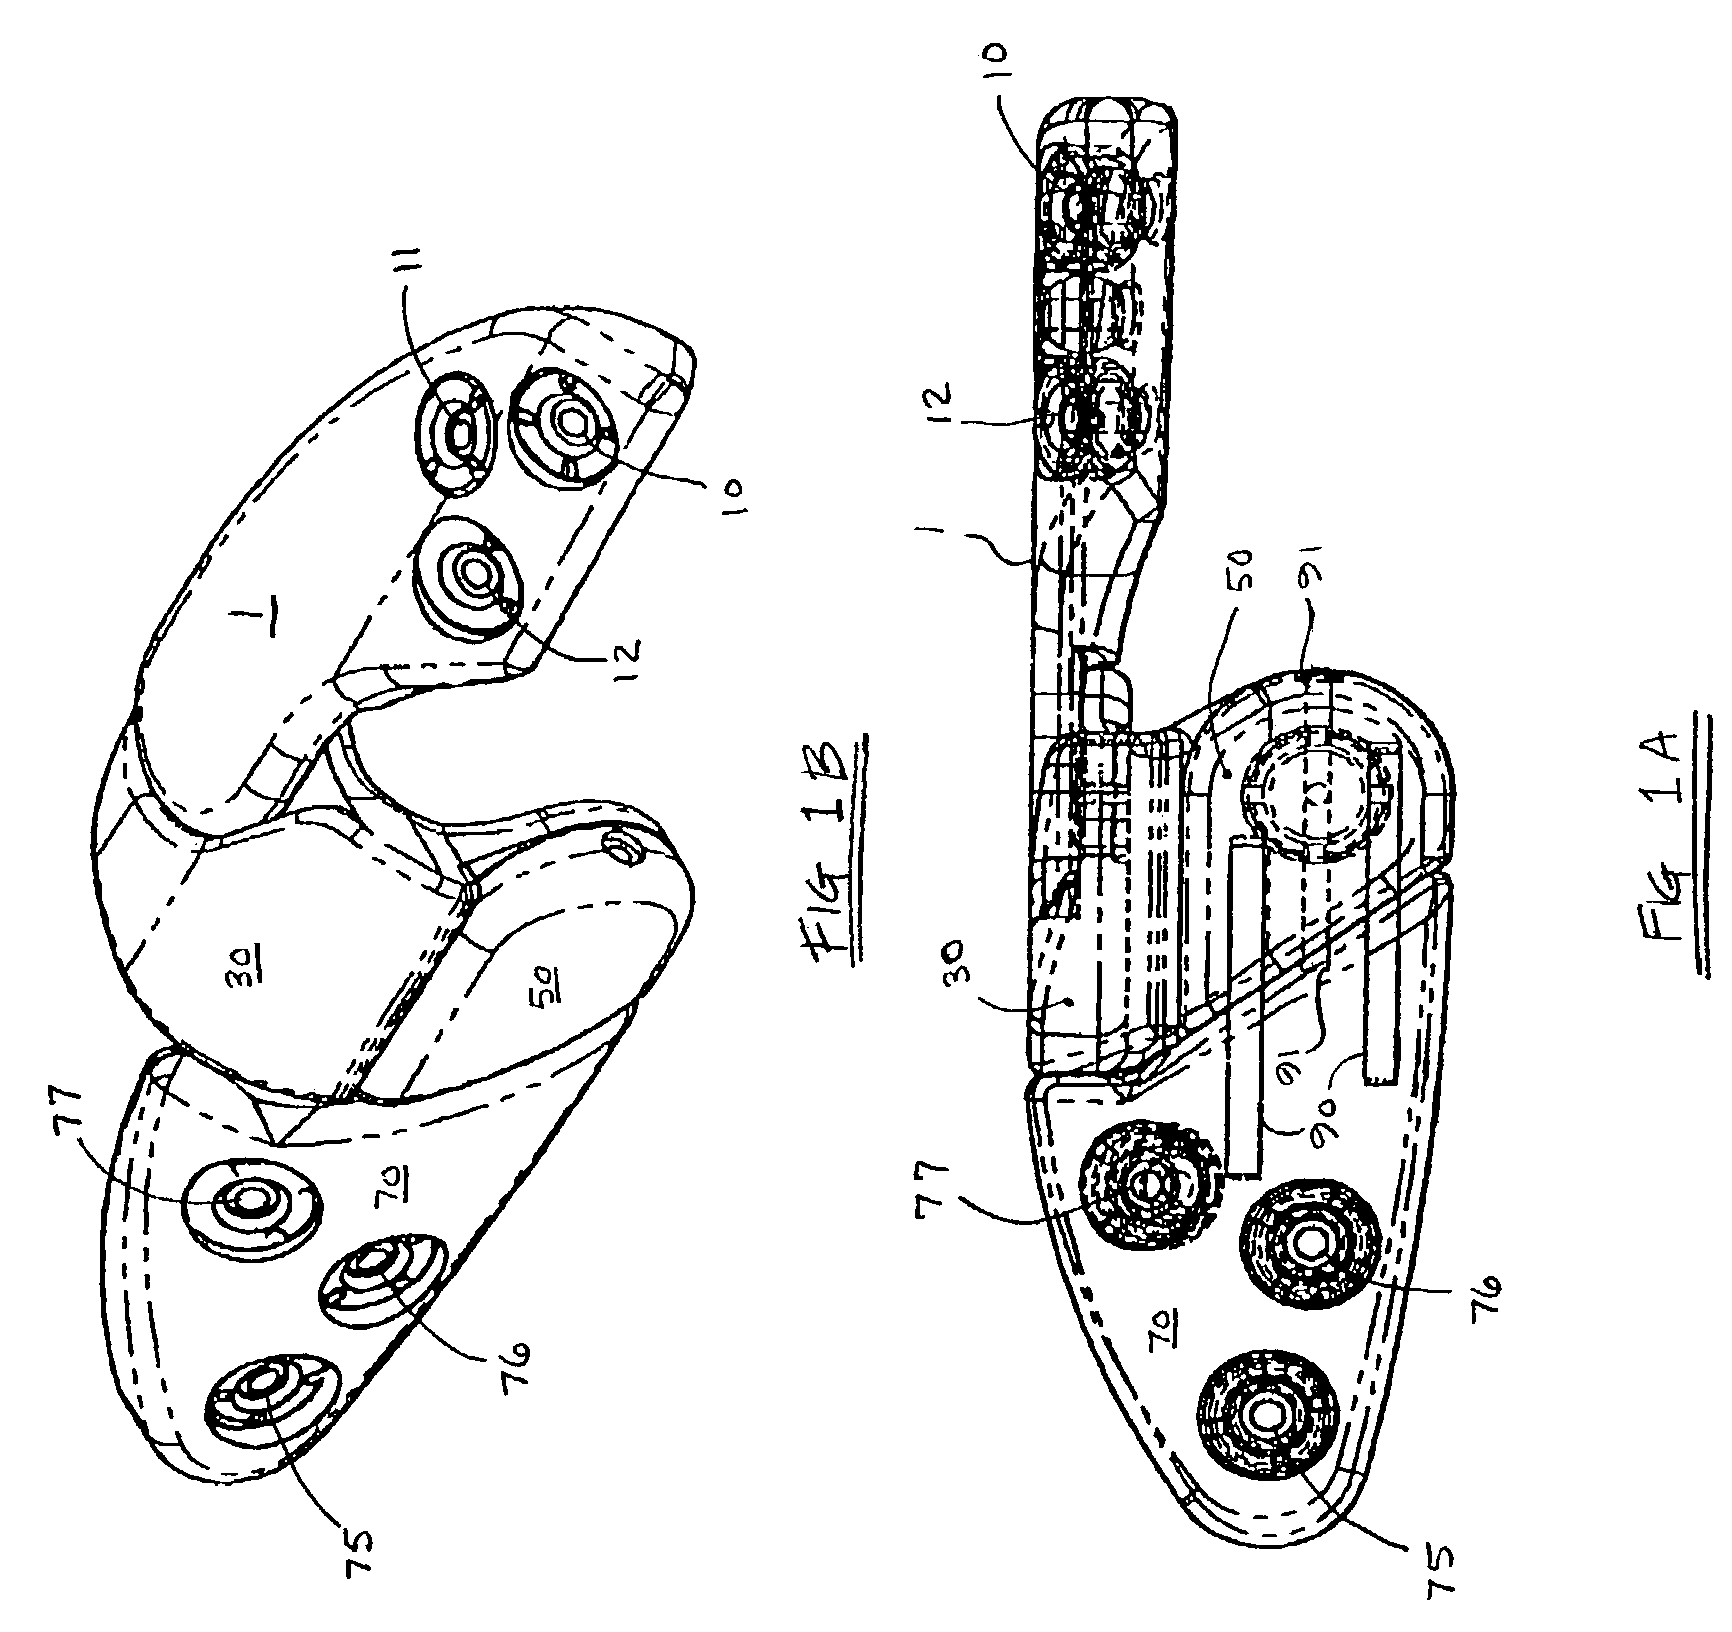 Apparatus for dynamic external fixation of distal radius and wrist fractures